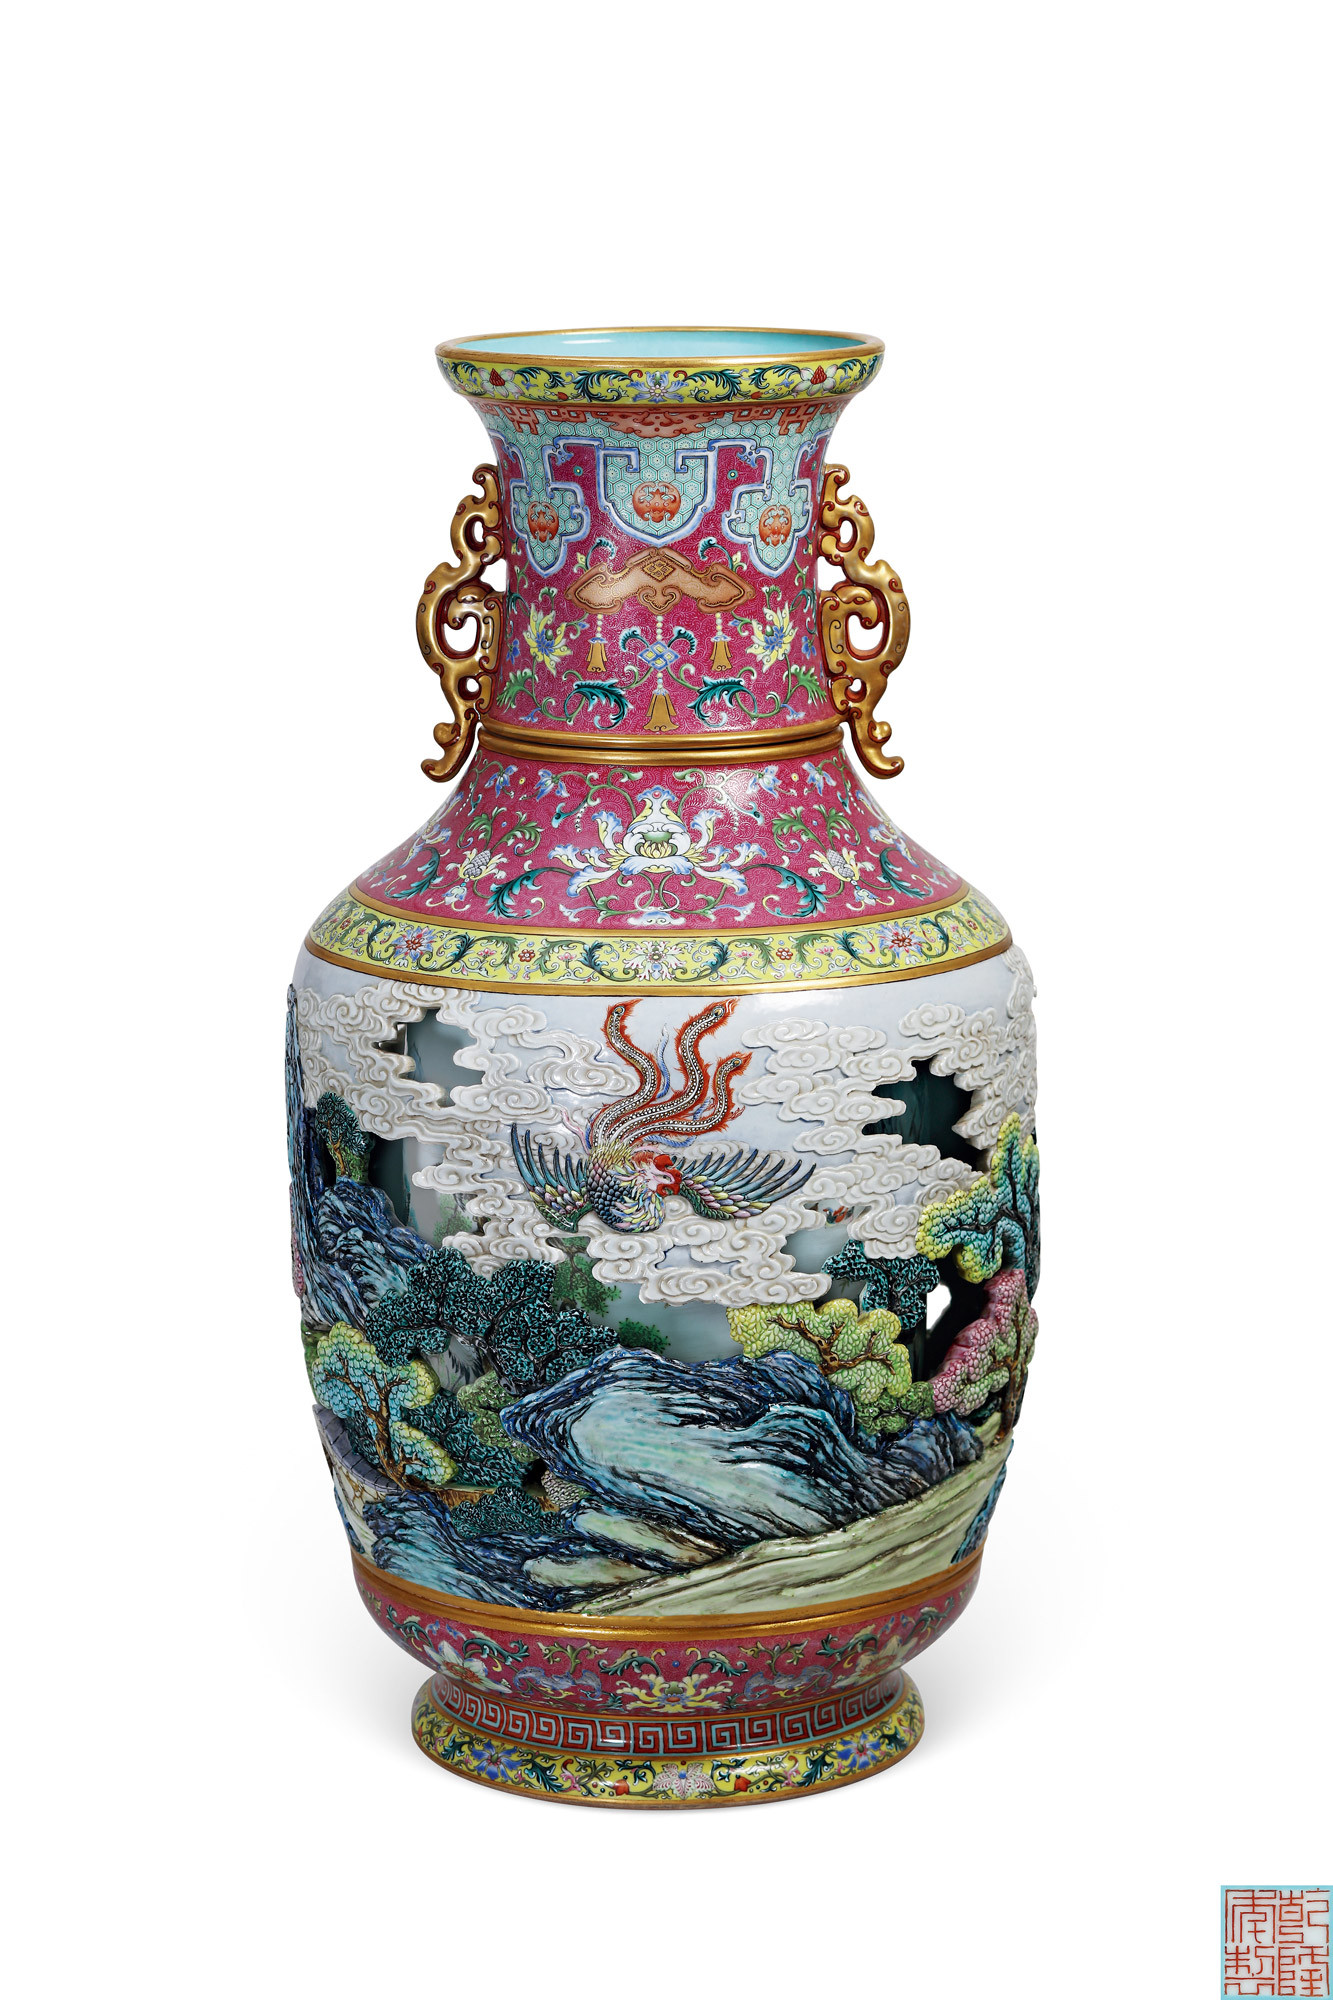 A MAGNIFICENT AND EXTREMELY RARE YANGCAI RUBY-GROUND WITH CARVED OPEN-WORK ‘PHOENIX SCENE’ REVOLVING VASE